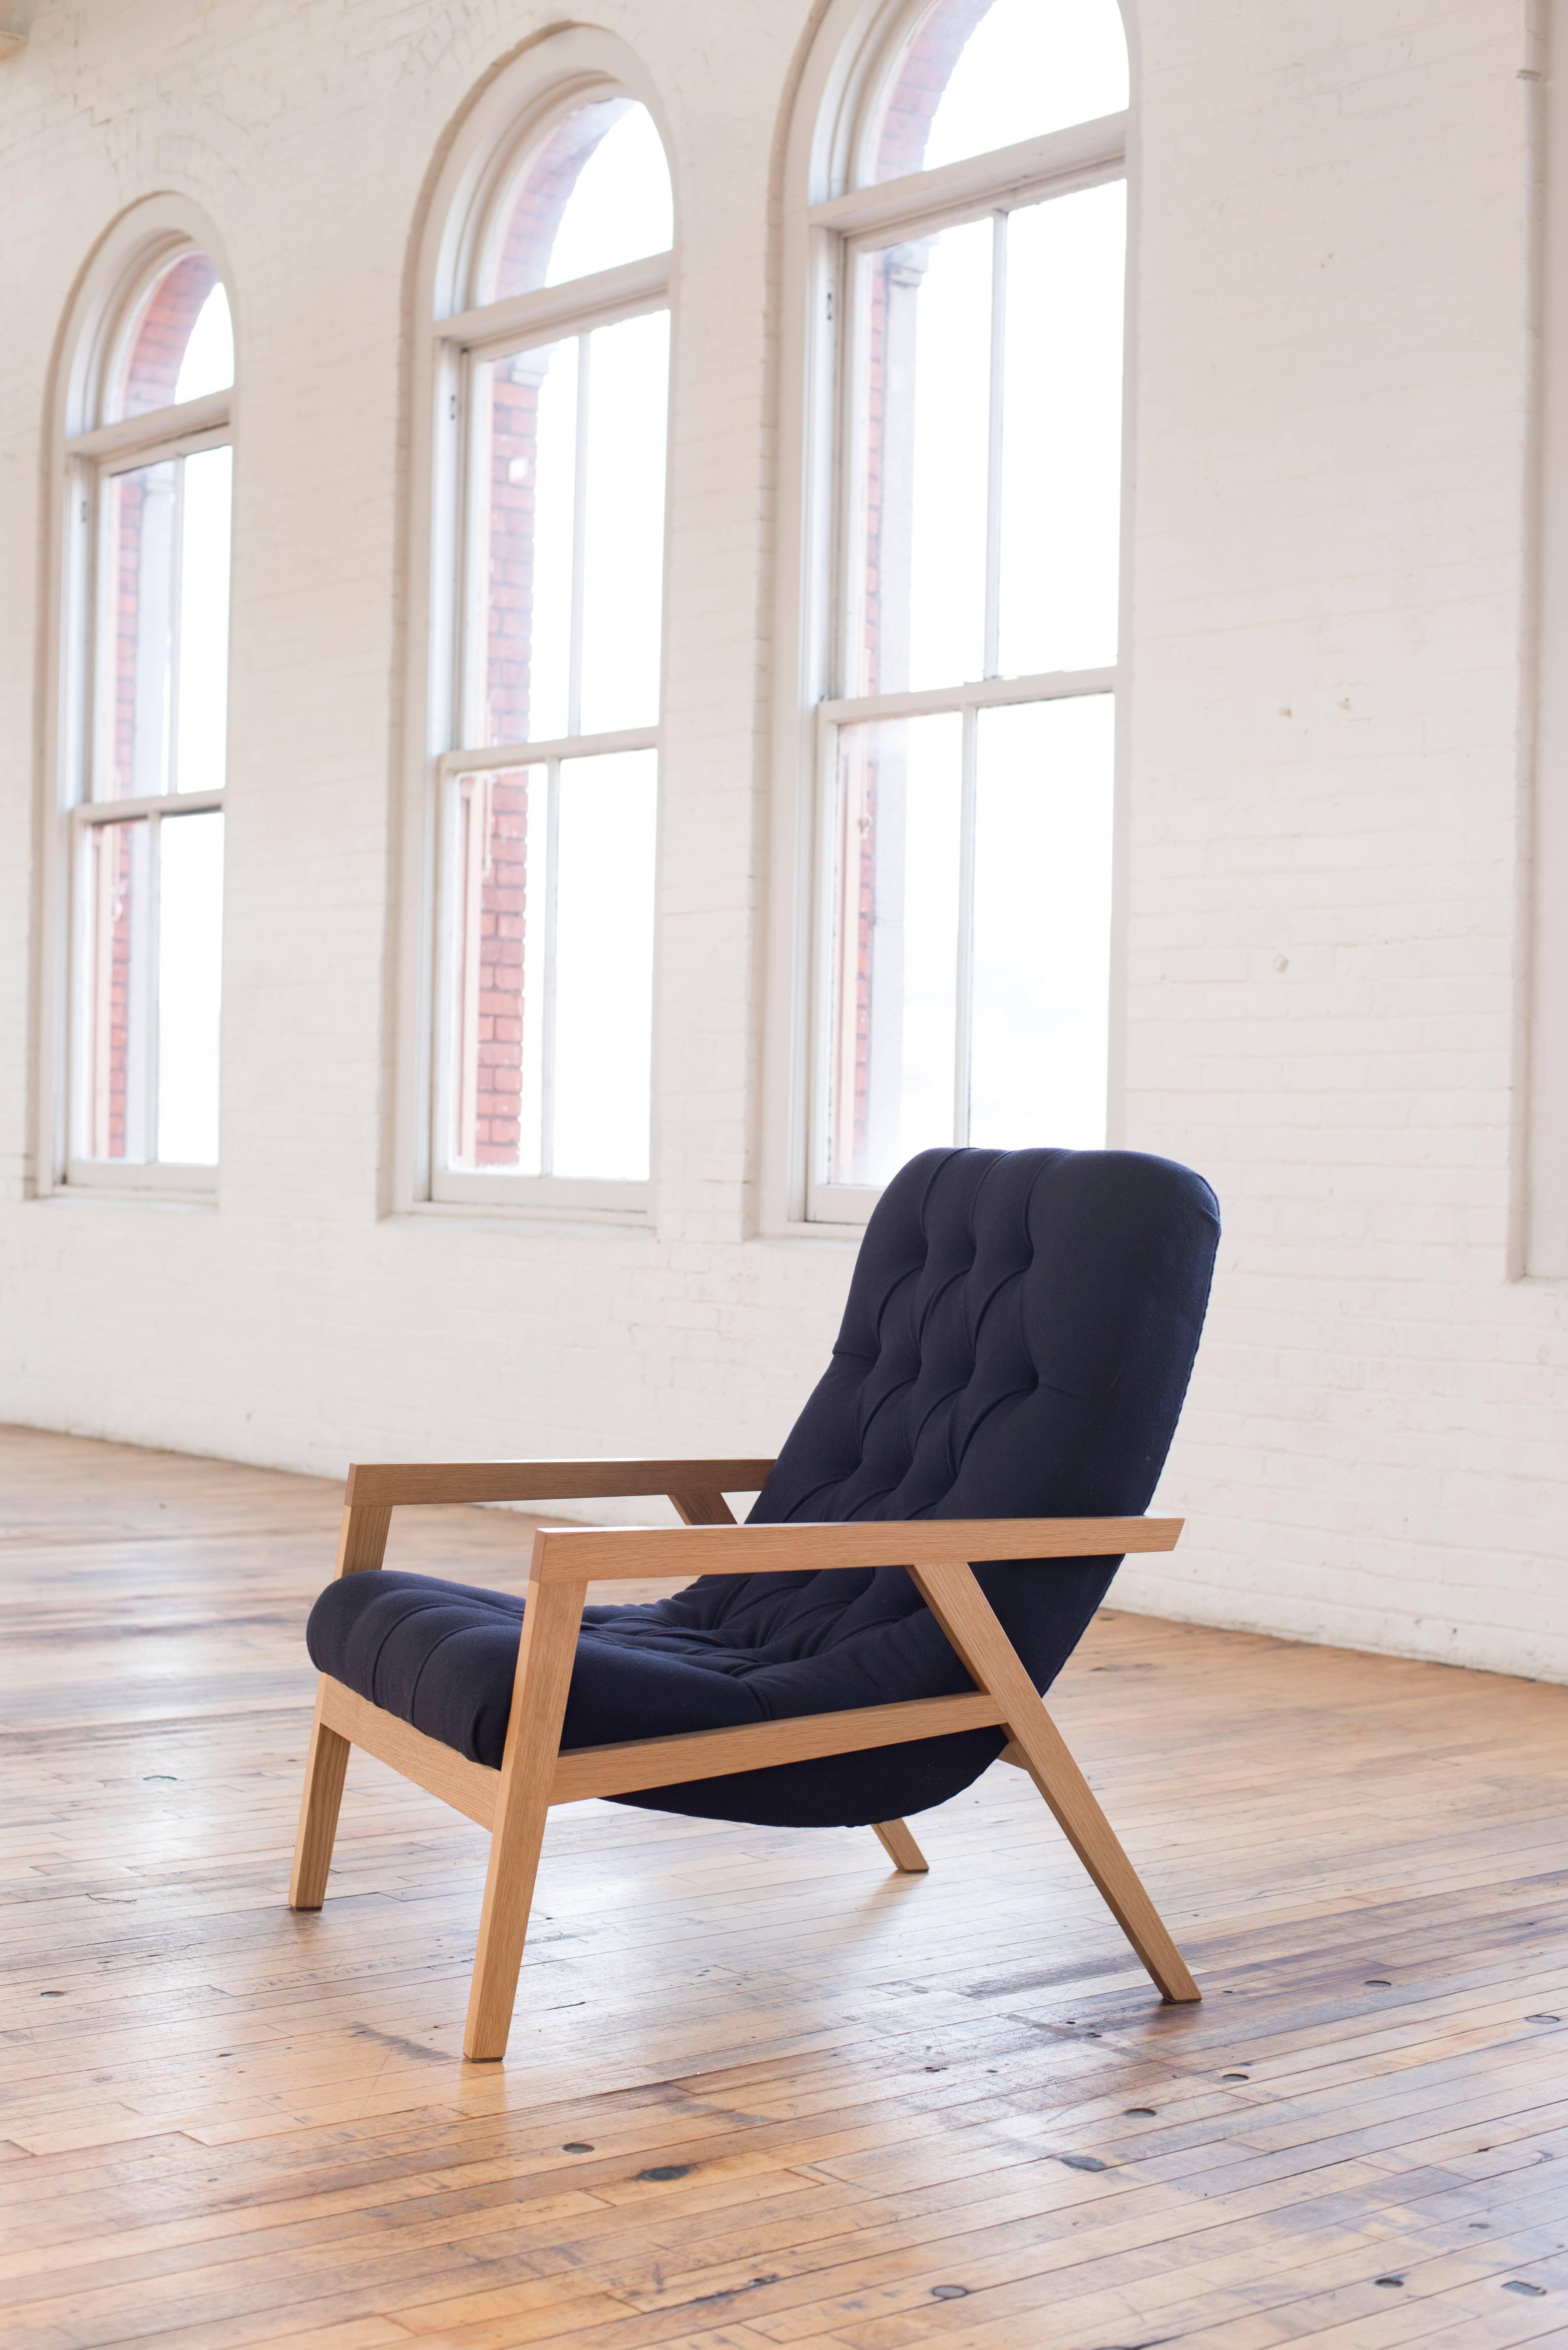 The Regina Lounge is a handcrafted, modern contemporary lounge chair with a solid wood frame that cradles a simple curved laminated plywood shell, hidden under layers of foam and traditional diamond tufted leather or wool. Incredibly comfortable,